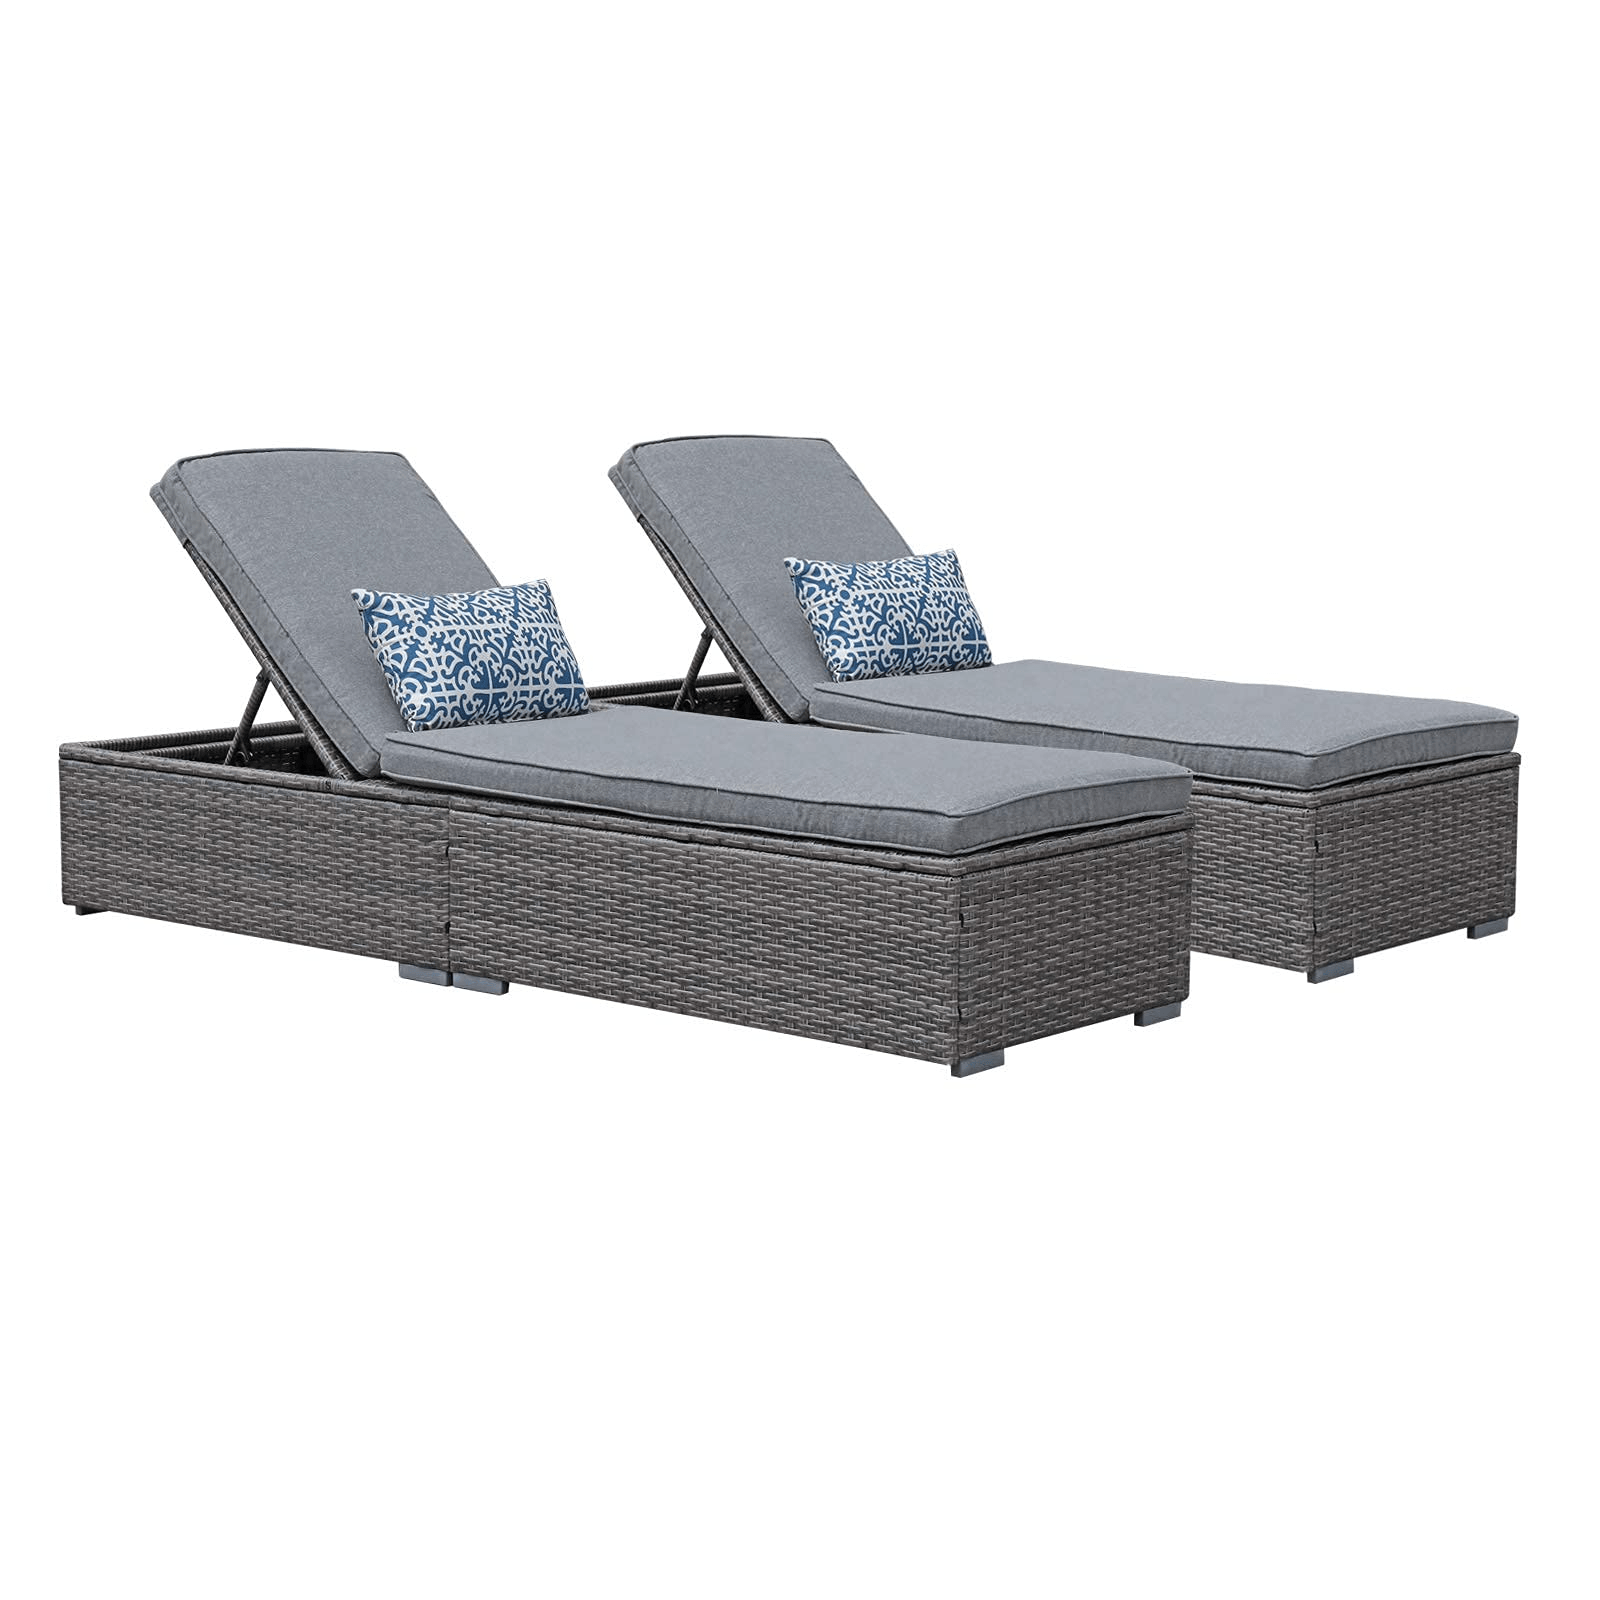 Arcadia Chaise Lounge with Grey Cushions, Set of Two - OrangeCasual